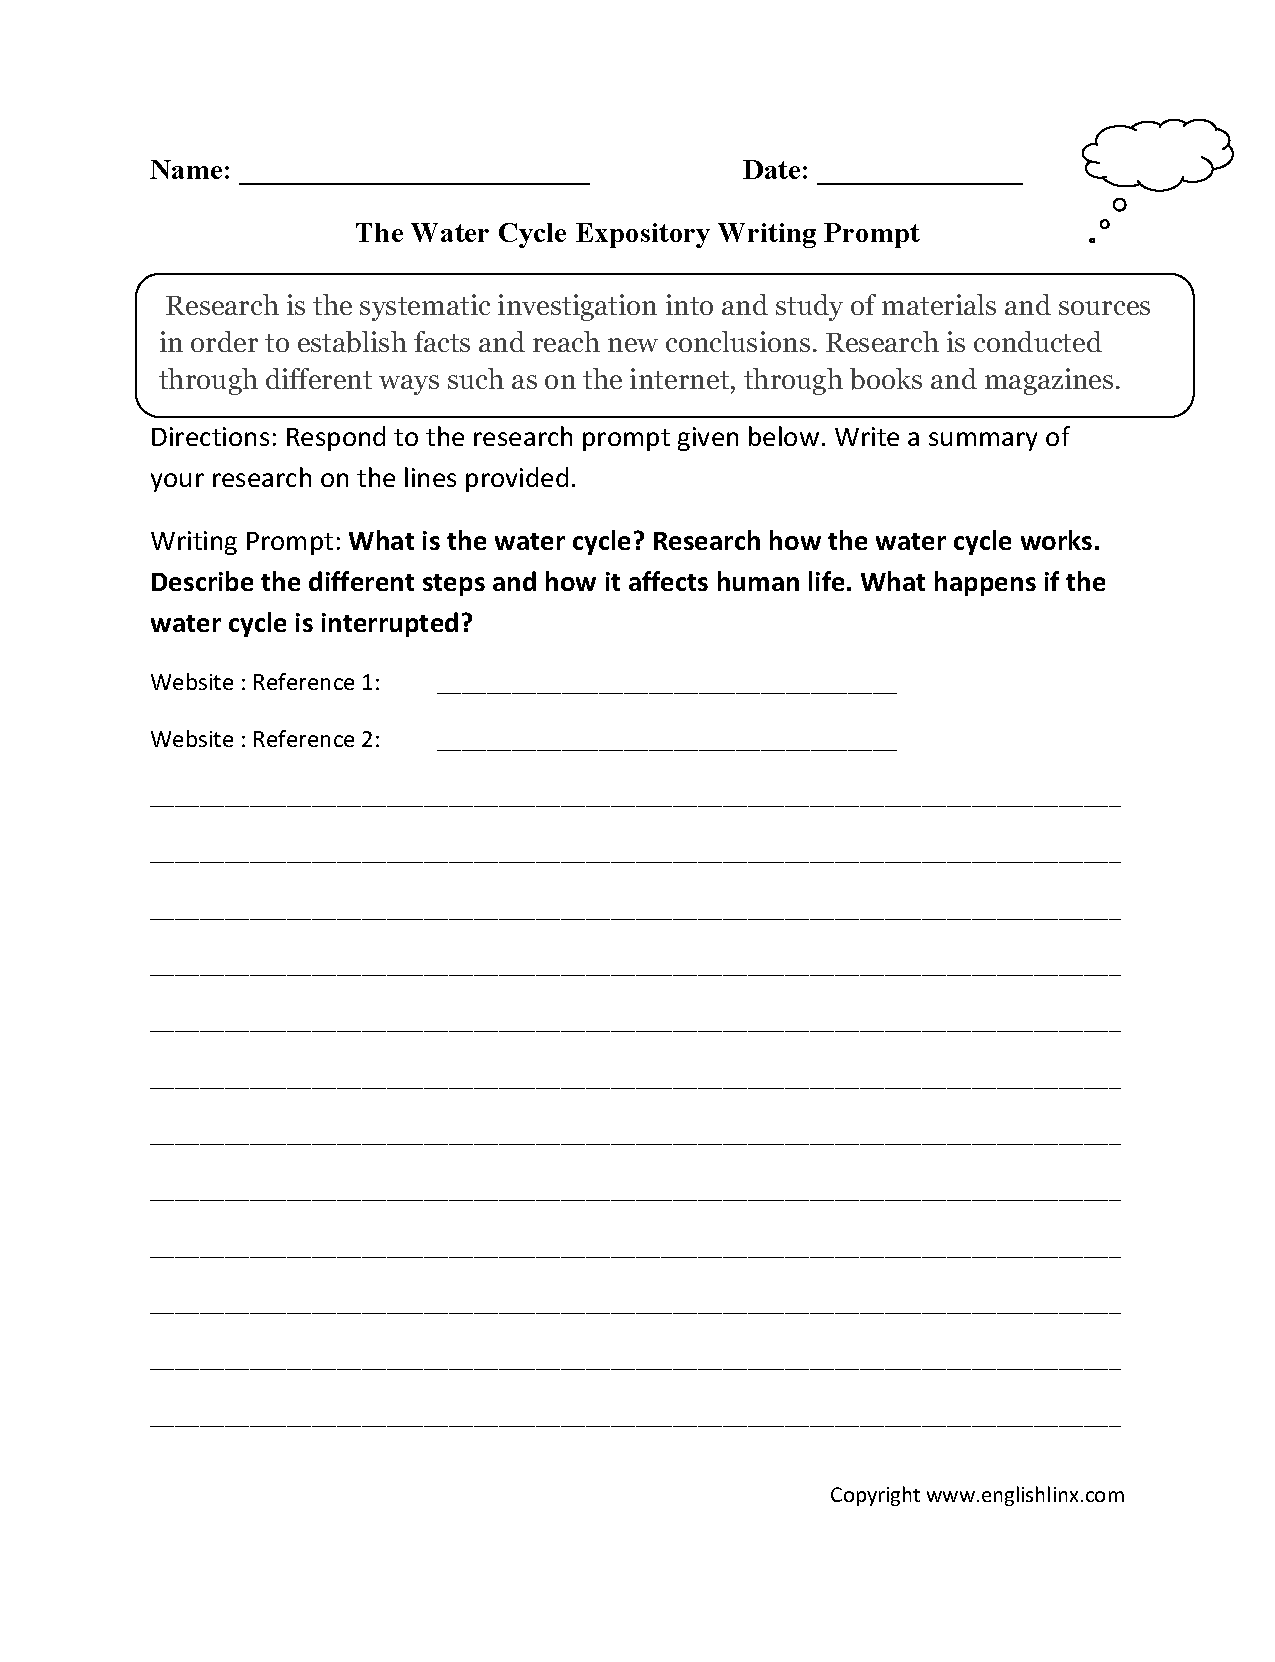 Water Expository and Research Writing Prompts Worksheets